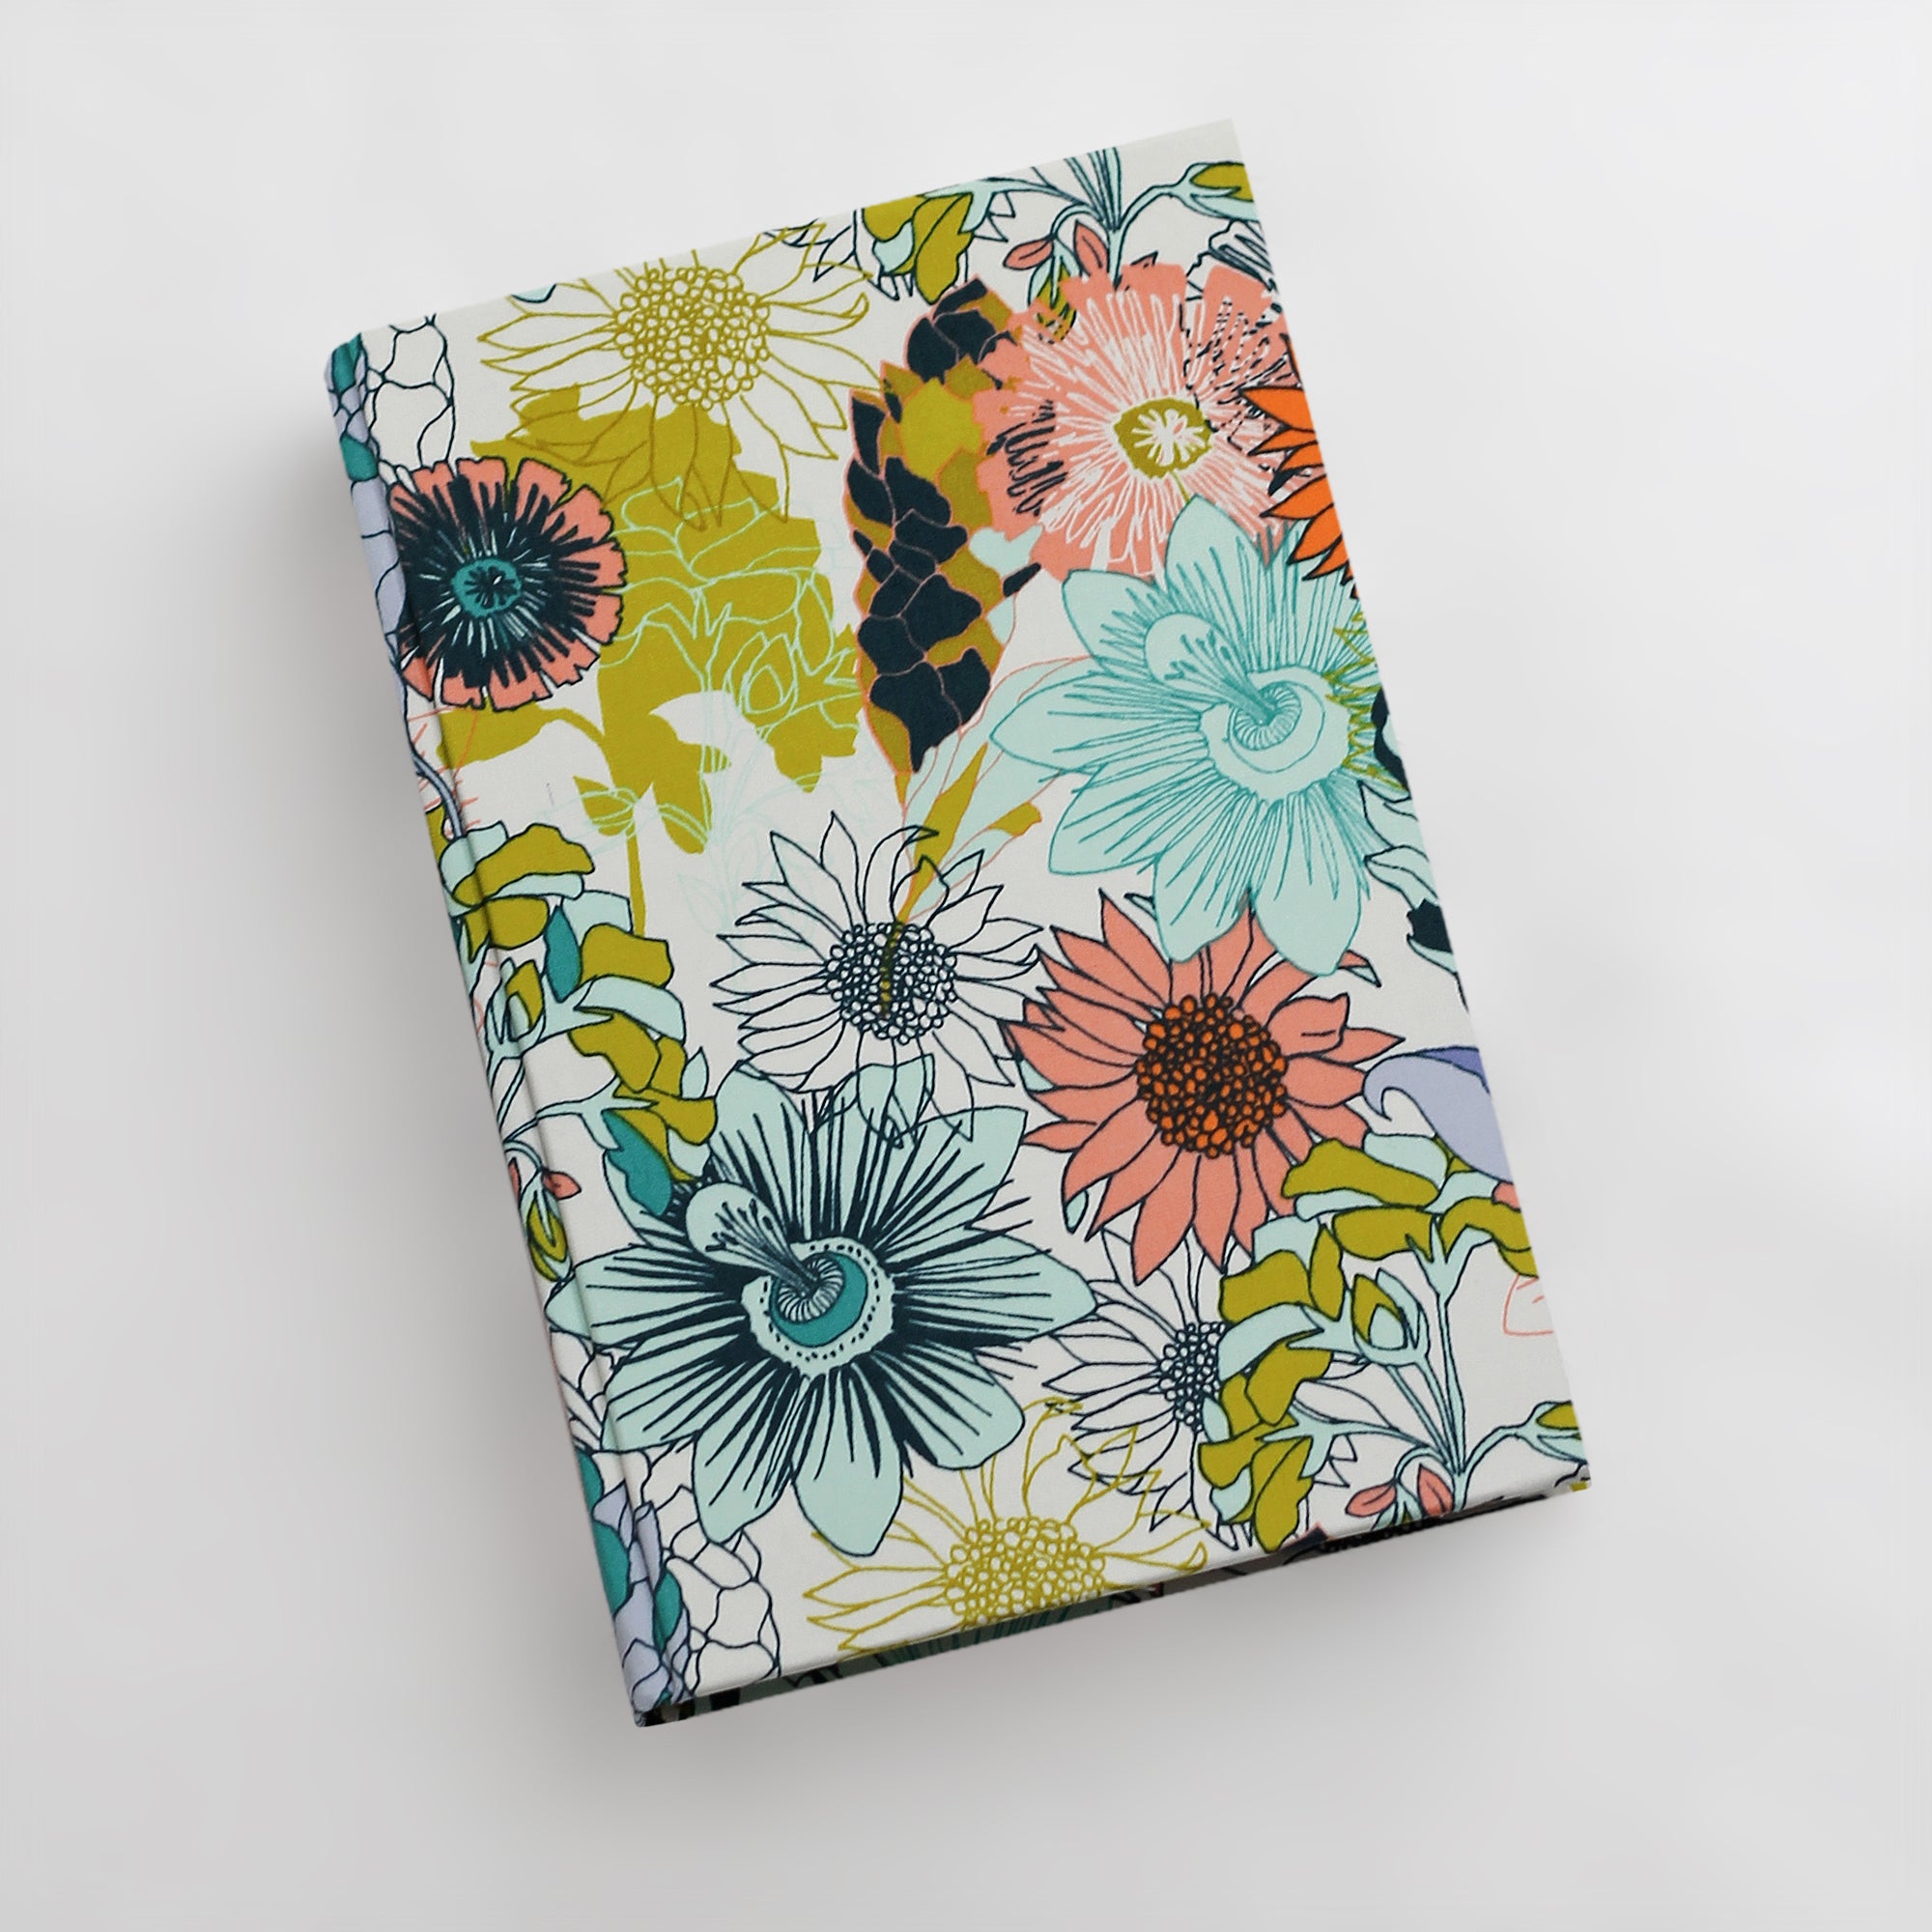 Medium 5.5x8.5 Blank Page Journal, Cover: Celery Cotton